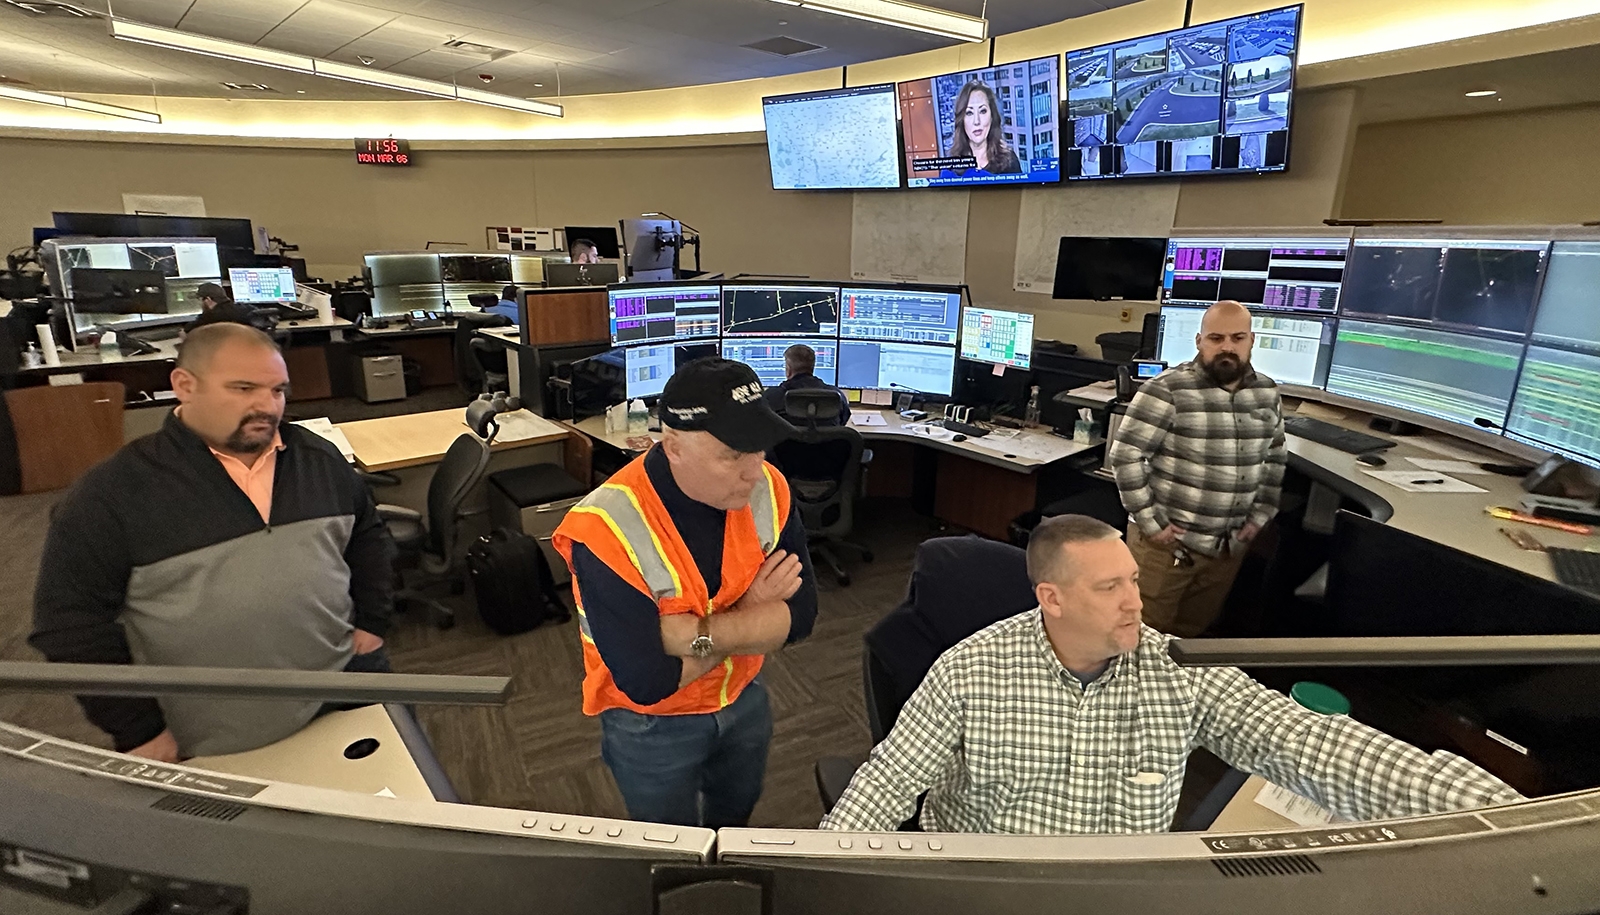 employees looking at monitors in a control center